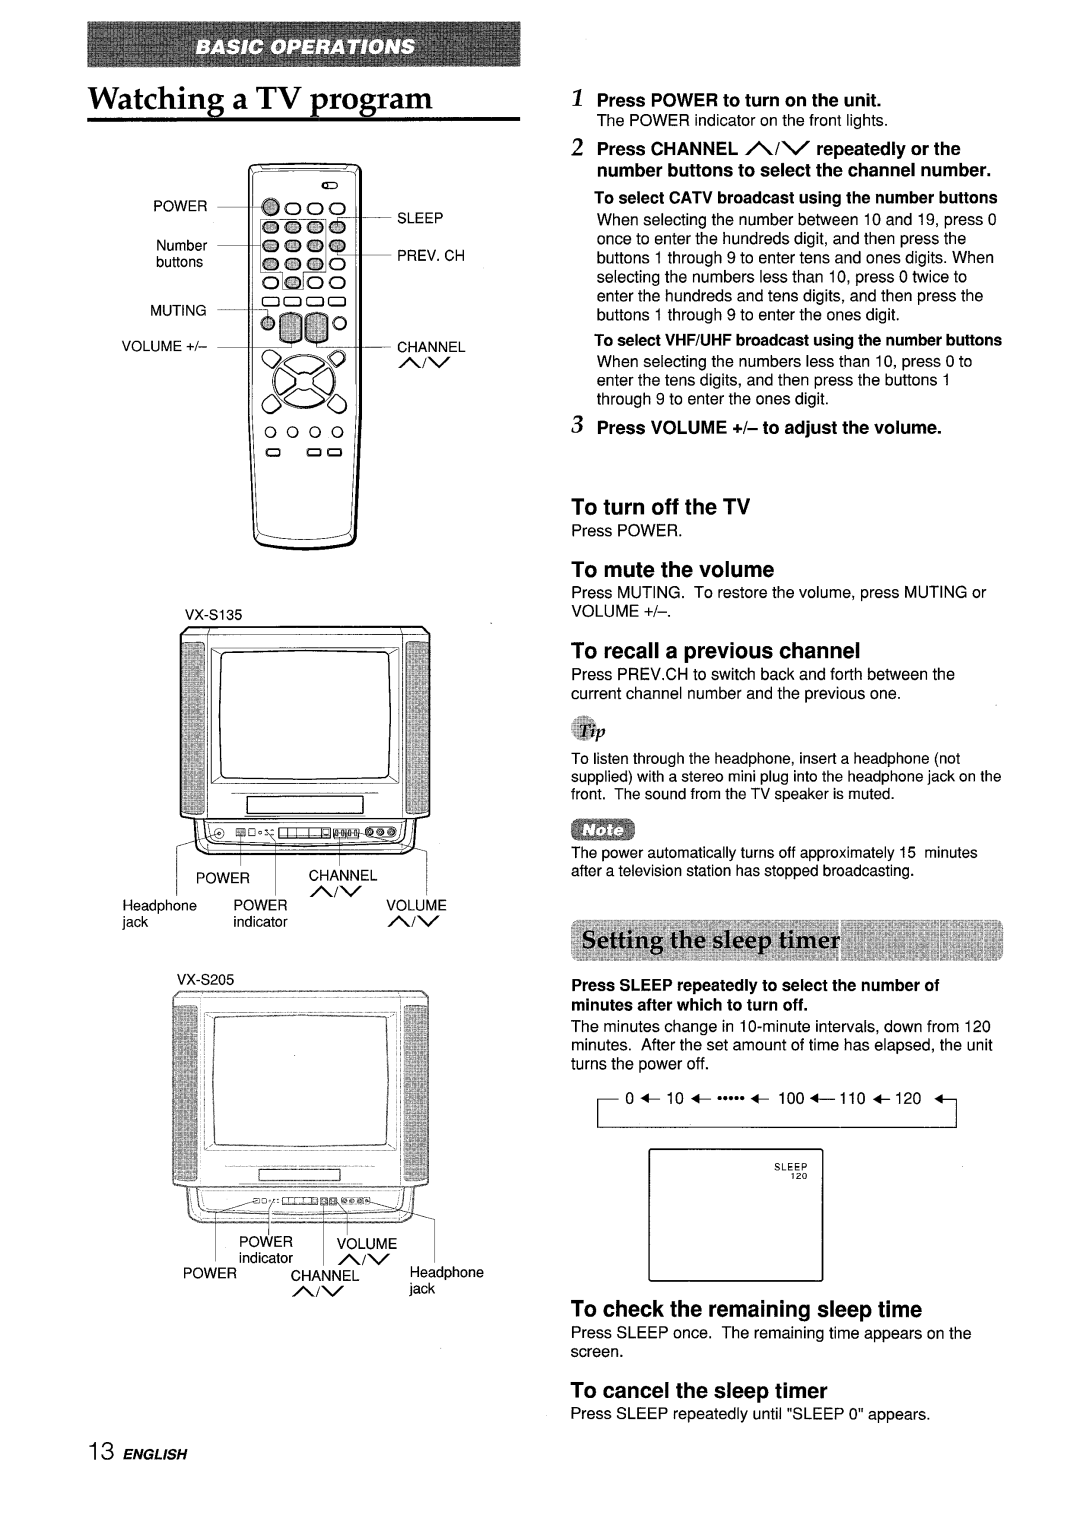 Aiwa VX-S135U, VX-S205U manual Watchirw a TV txo~ram, To turn off the TV, To mute the volume, To recall a previous channel 